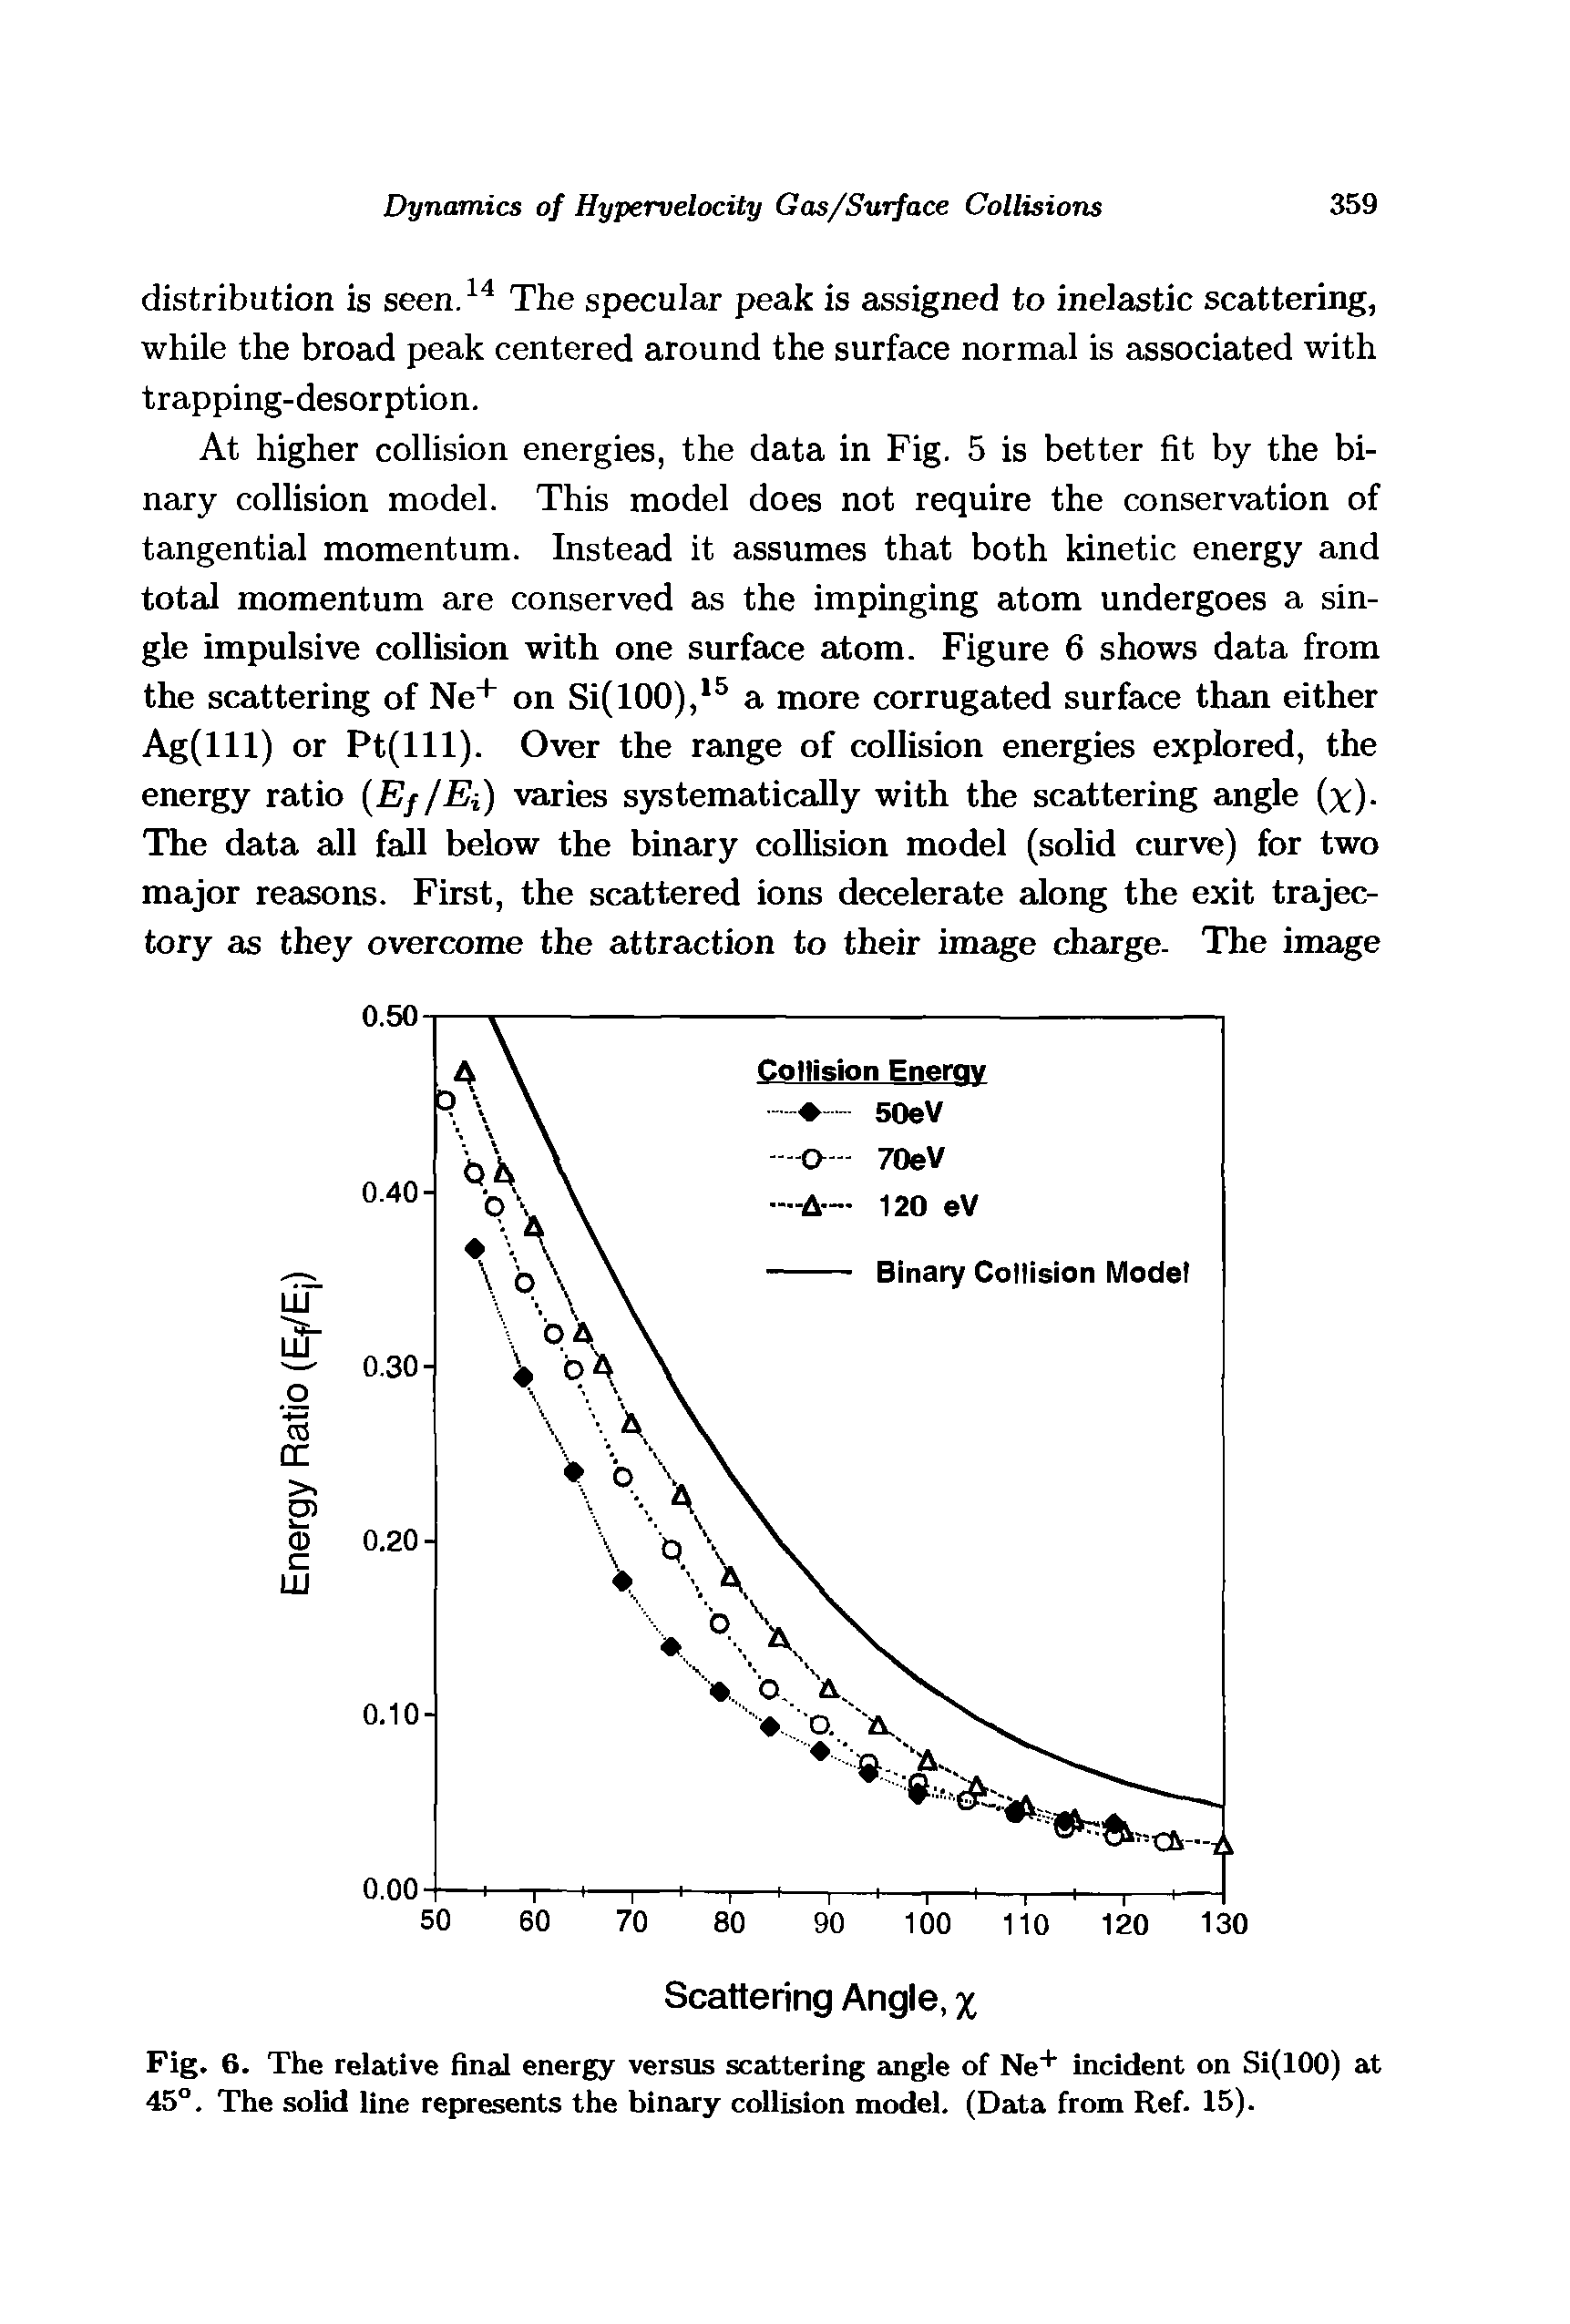 Fig. 6. The relative final energy versus scattering angle of Ne" " incident on Si(lOO) at 45°. The solid line represents the binary collision model. (Data from Ref. 15).